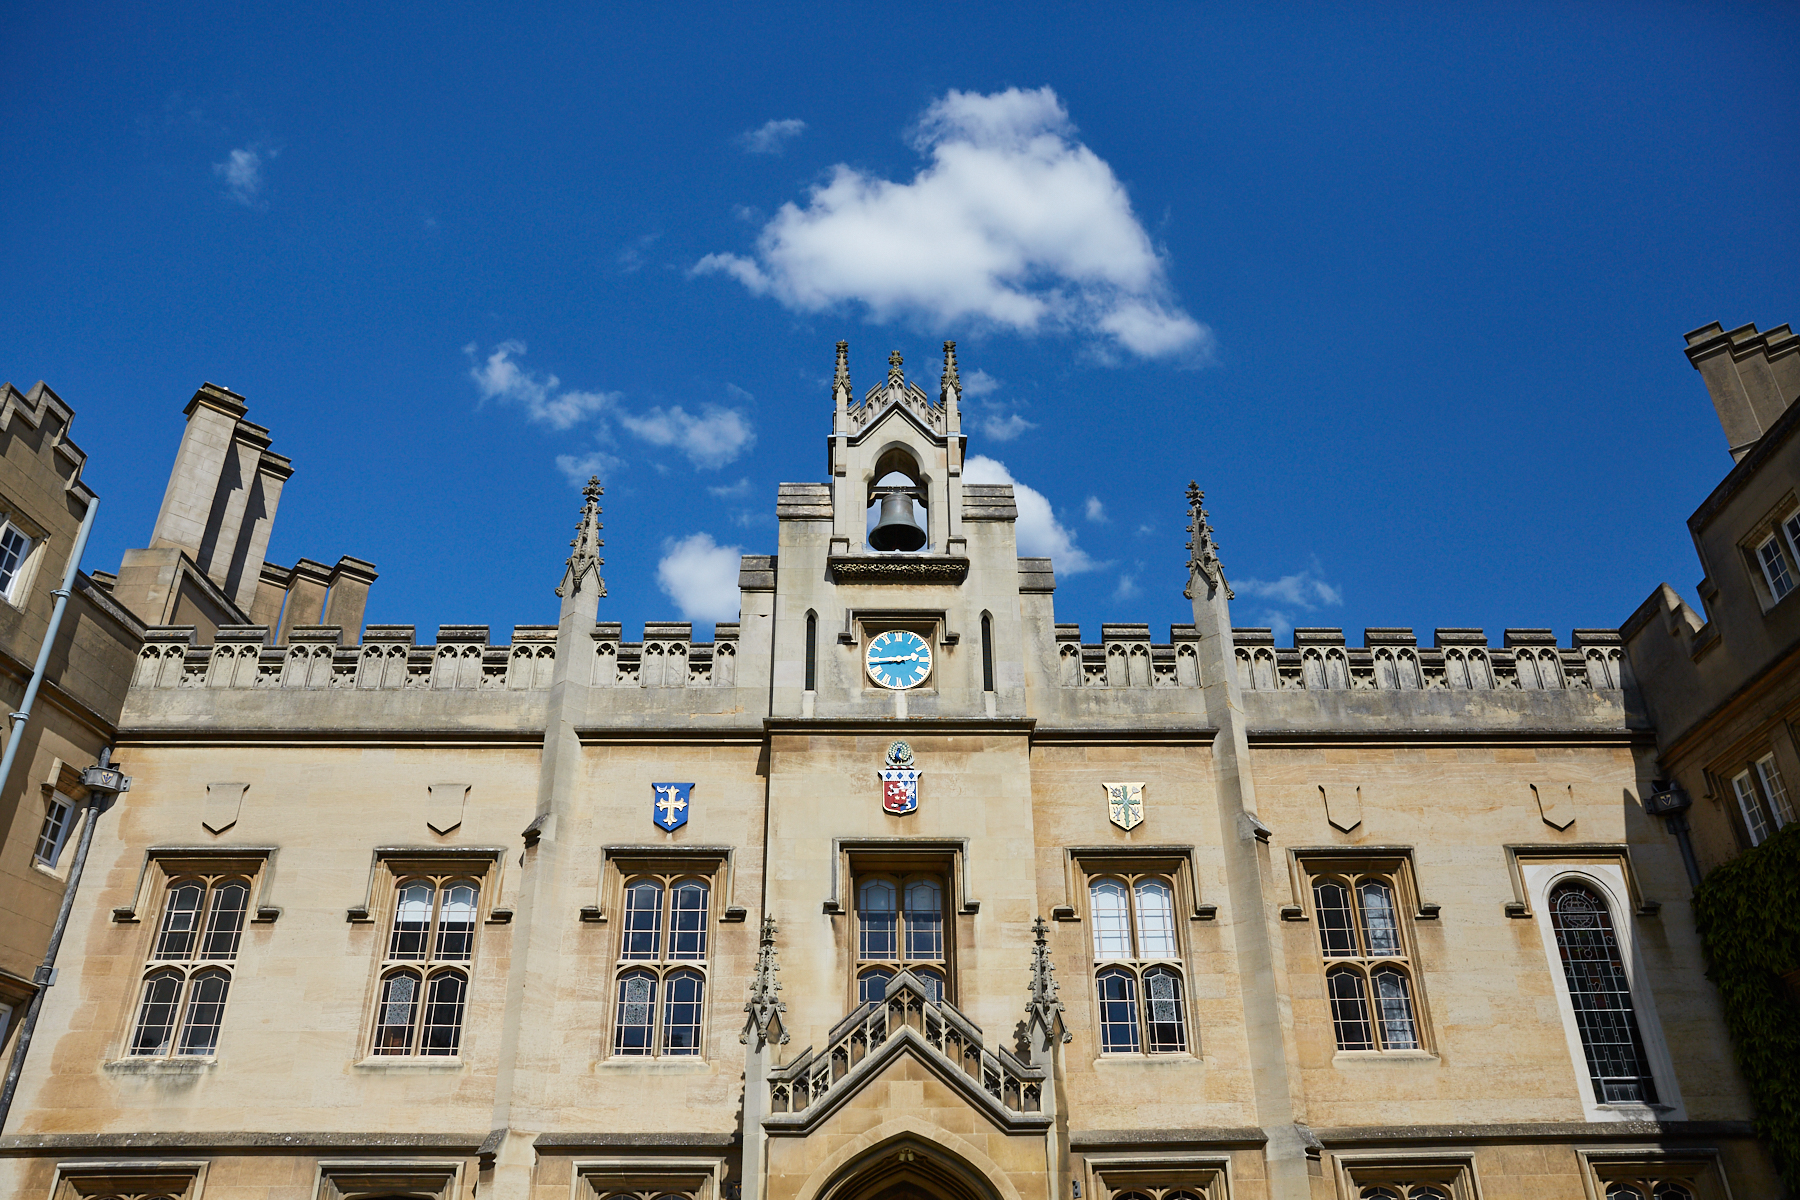 Image of Hall Court, Sidney Sussex College